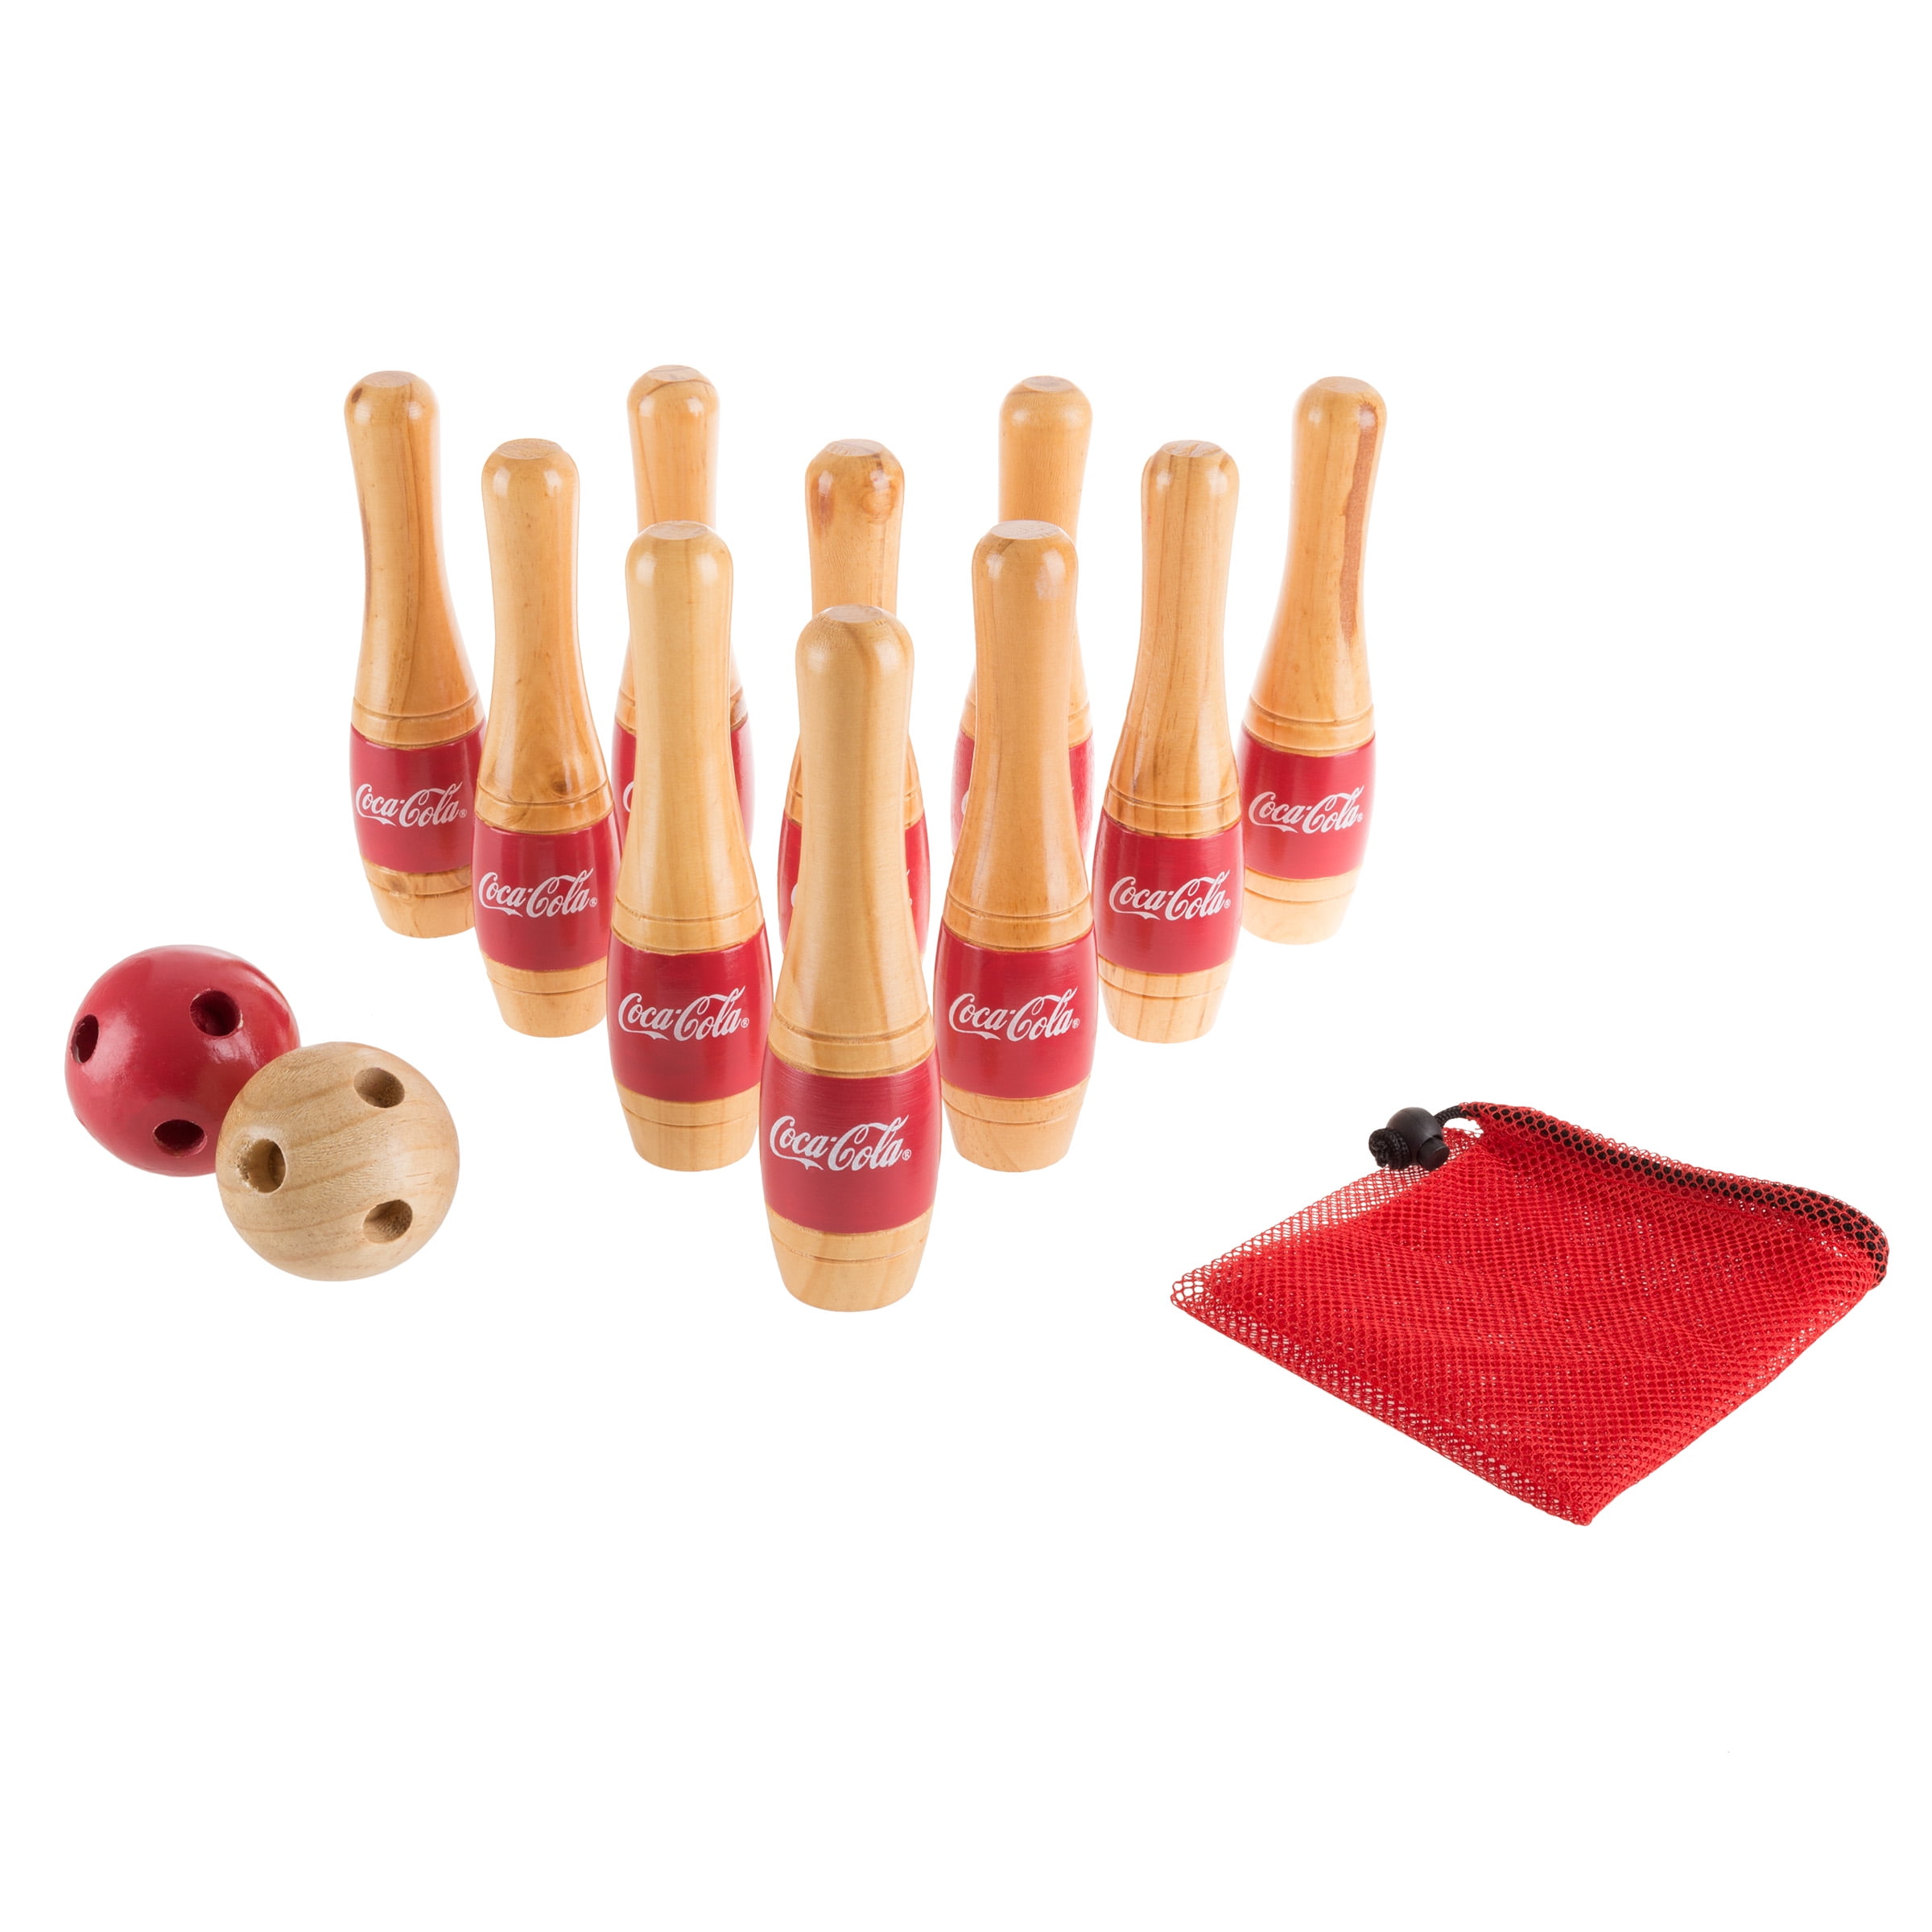 Coca Cola Bowling Set – Indoor and Outdoor Bowling Game for Adults and Kids  – 10 Wooden Pins, 2 Balls, and Mesh Carrying Bag by Hey Play (Red) -  Walmart.com